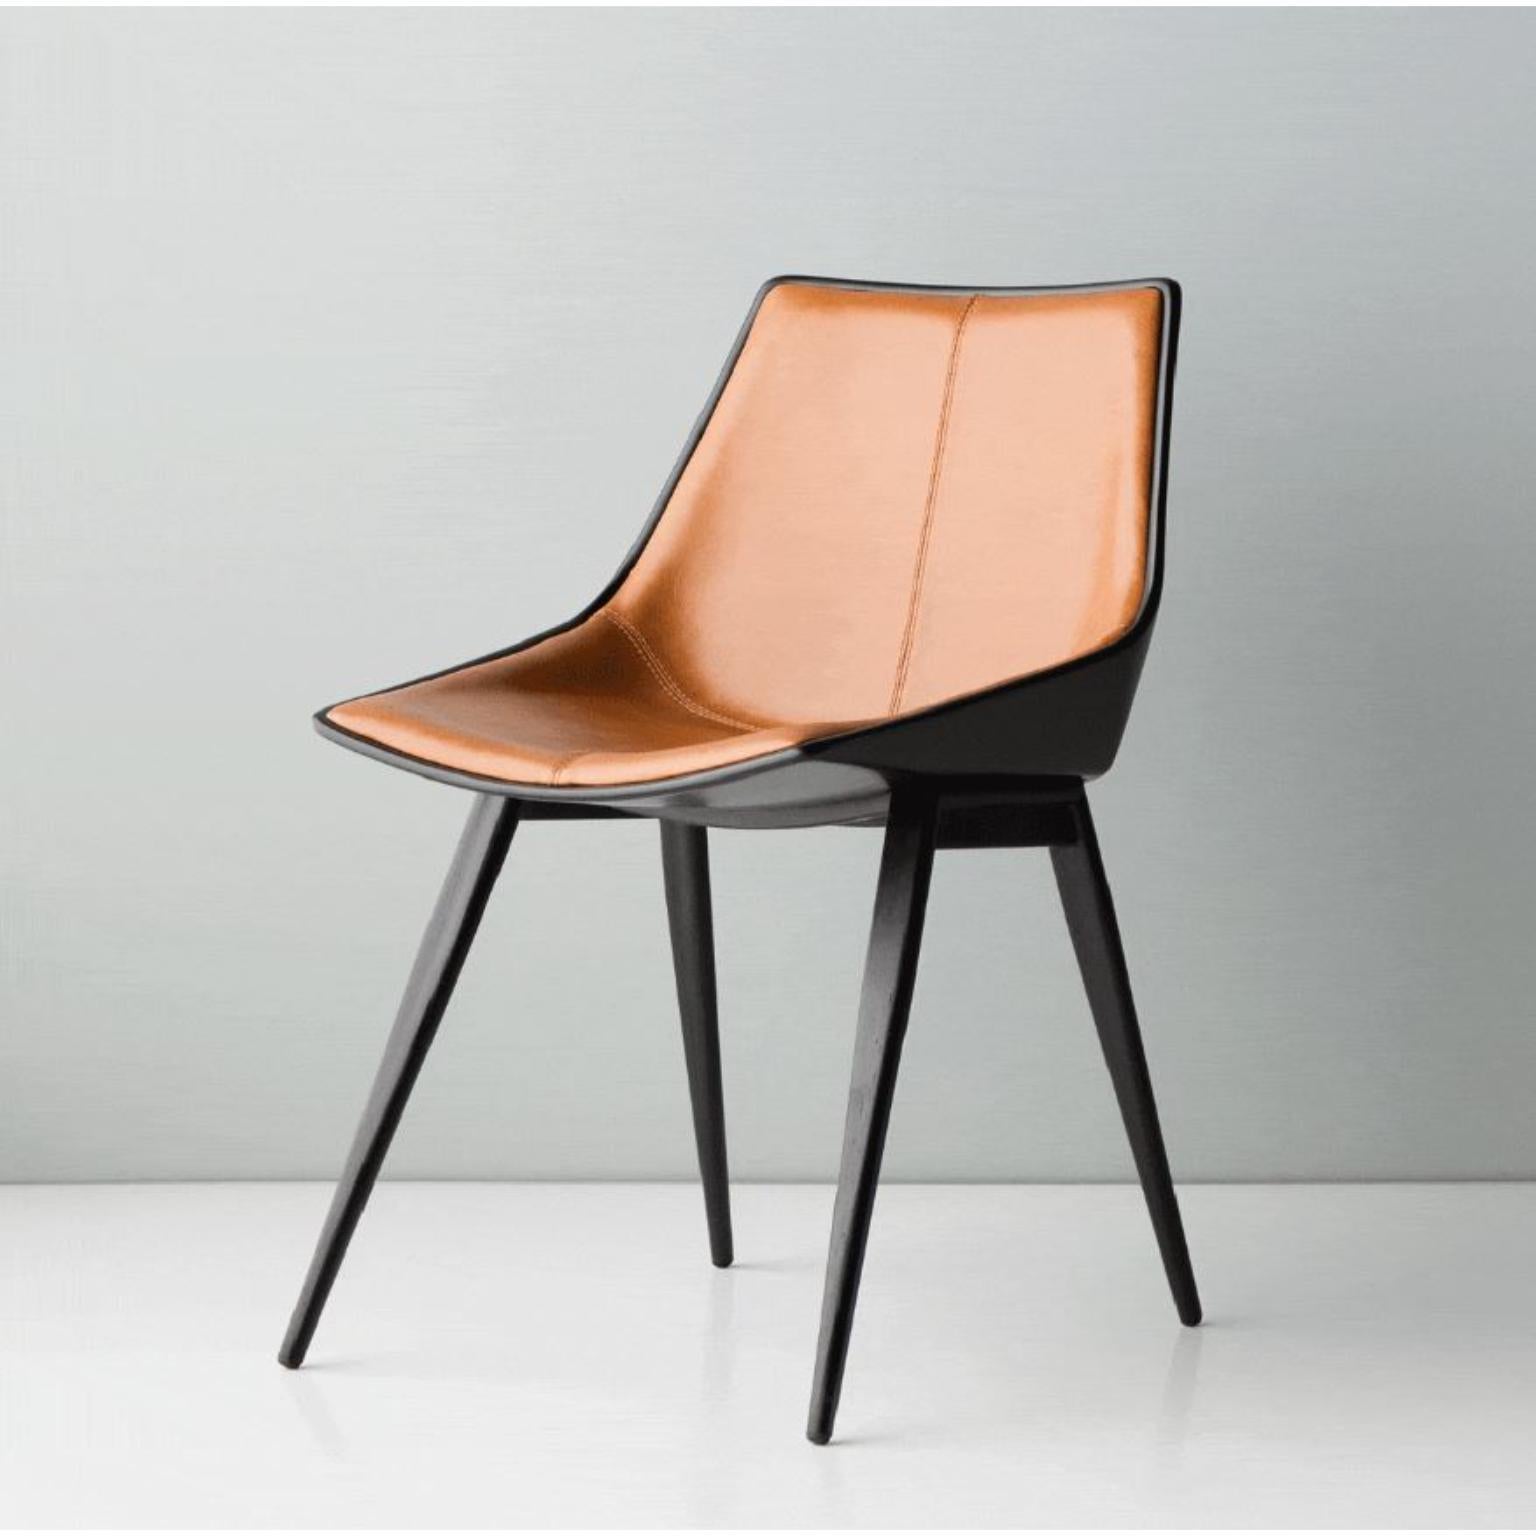 Play Chair by Doimo Brasil
Dimensions: W 51 x D 58 x H 78 cm 
Materials: Metal, upholstered seat. 


With the intention of providing good taste and personality, Doimo deciphers trends and follows the evolution of man and his space. To this end, it